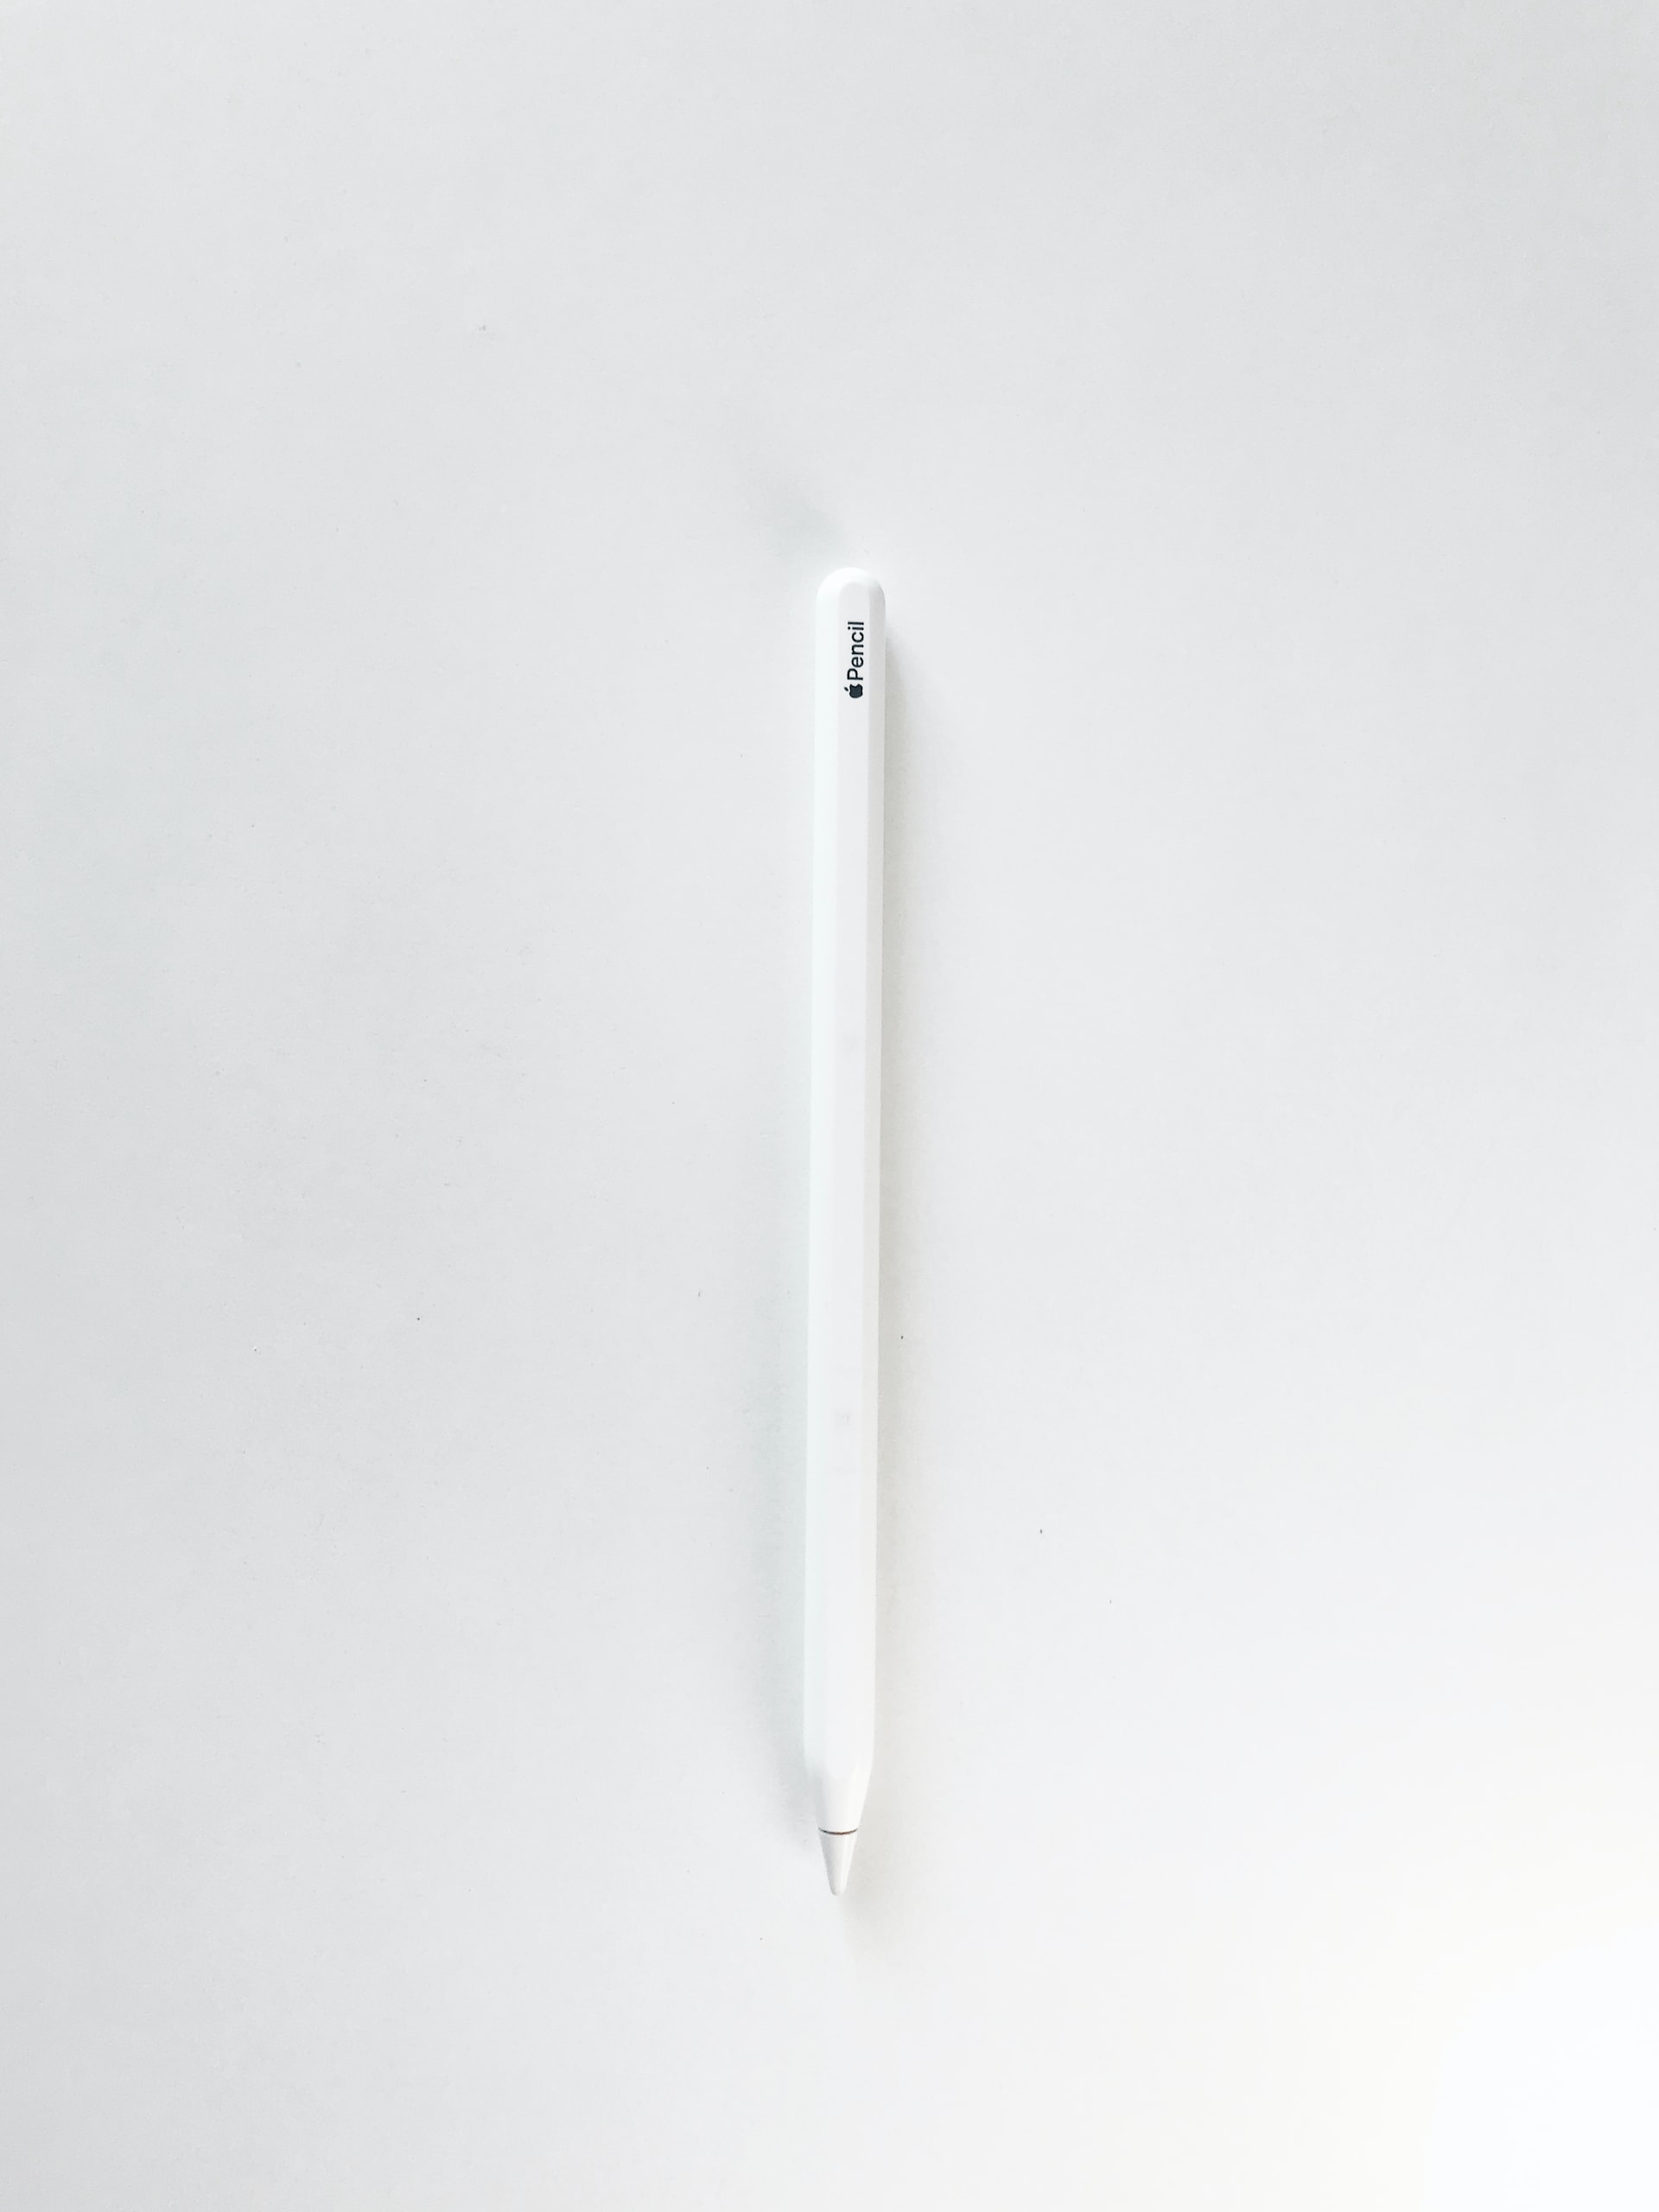 Why Is Everyone Freaking Out About the Apple Pencil?